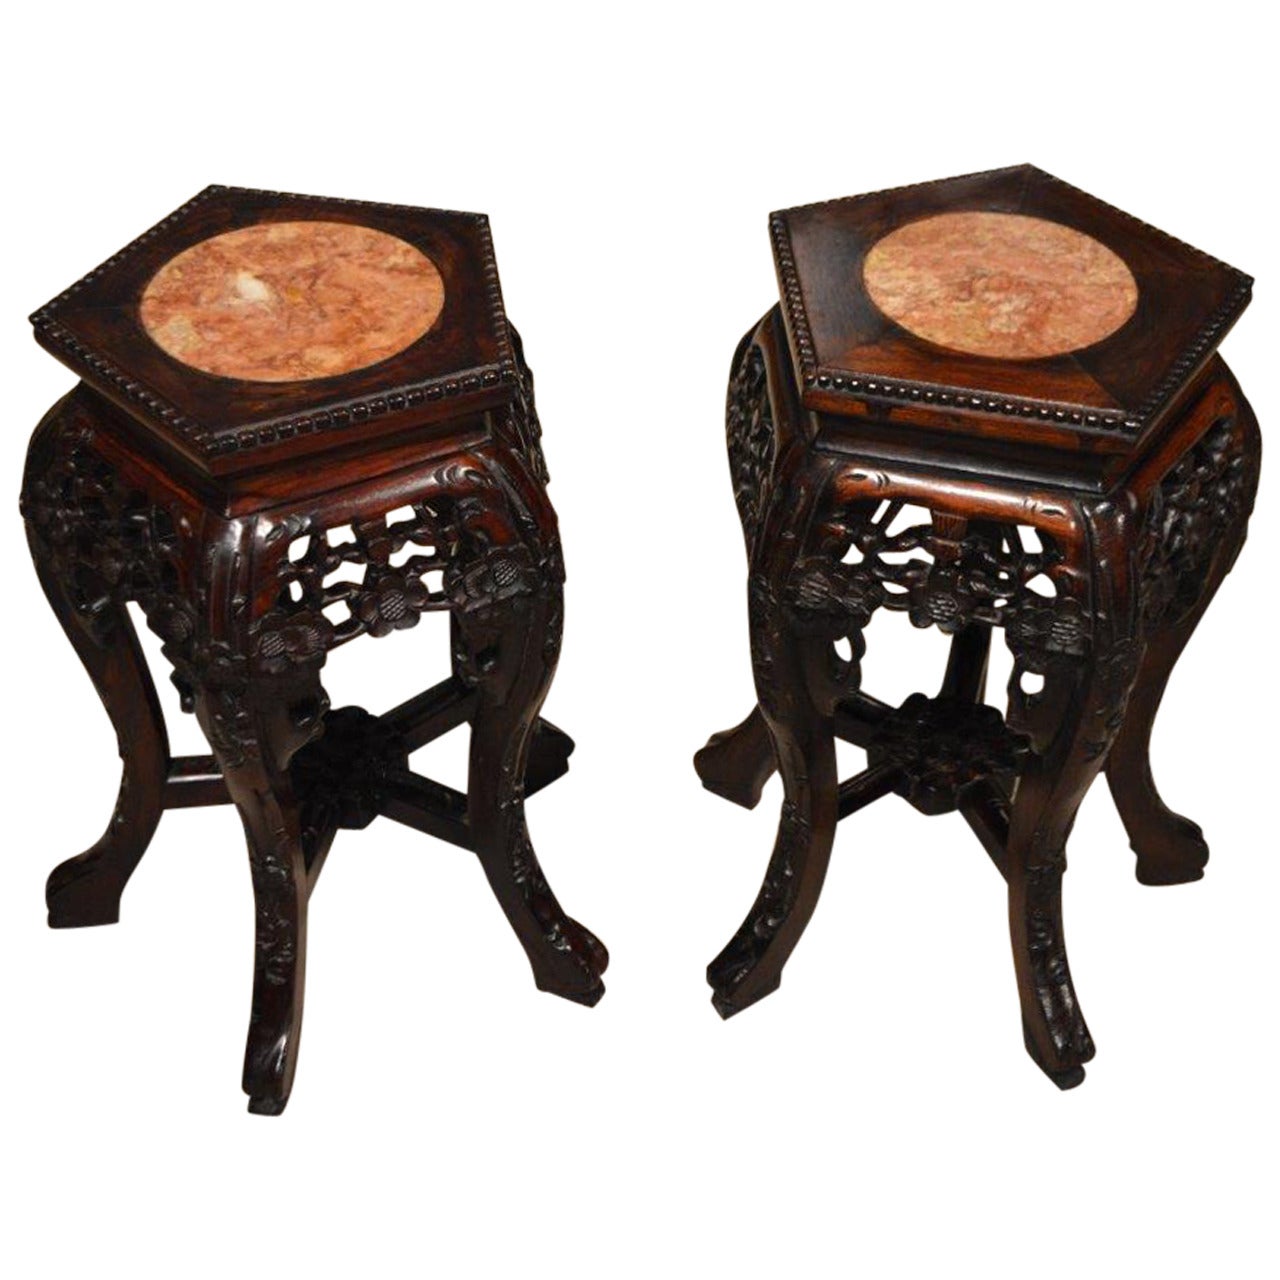 Small Pair of Hardwood Chinese Marble Inset Stands